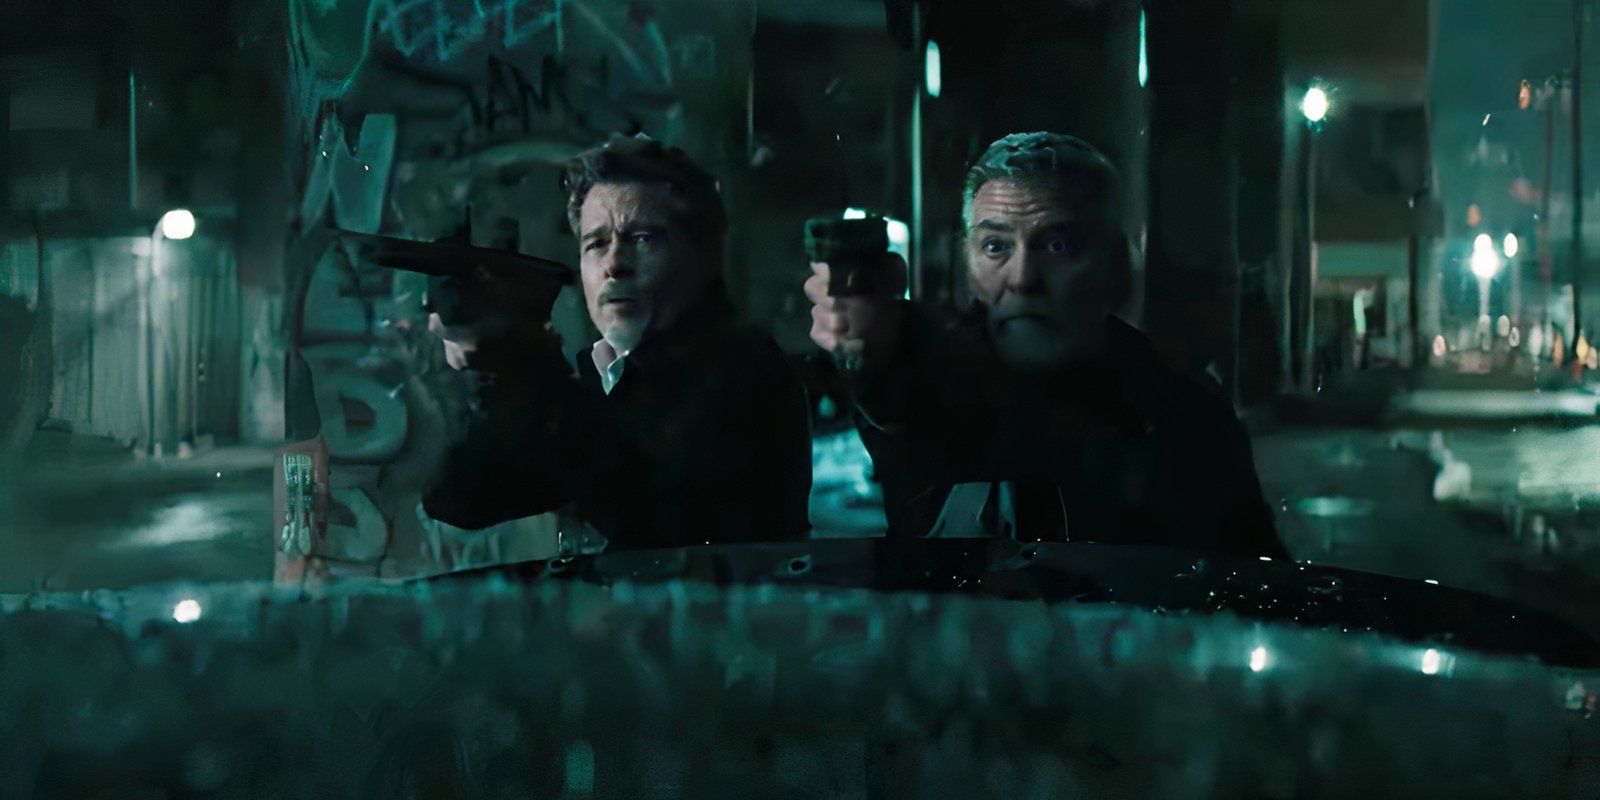 George Clooney and Brad Pitt shooting guns in Wolfs